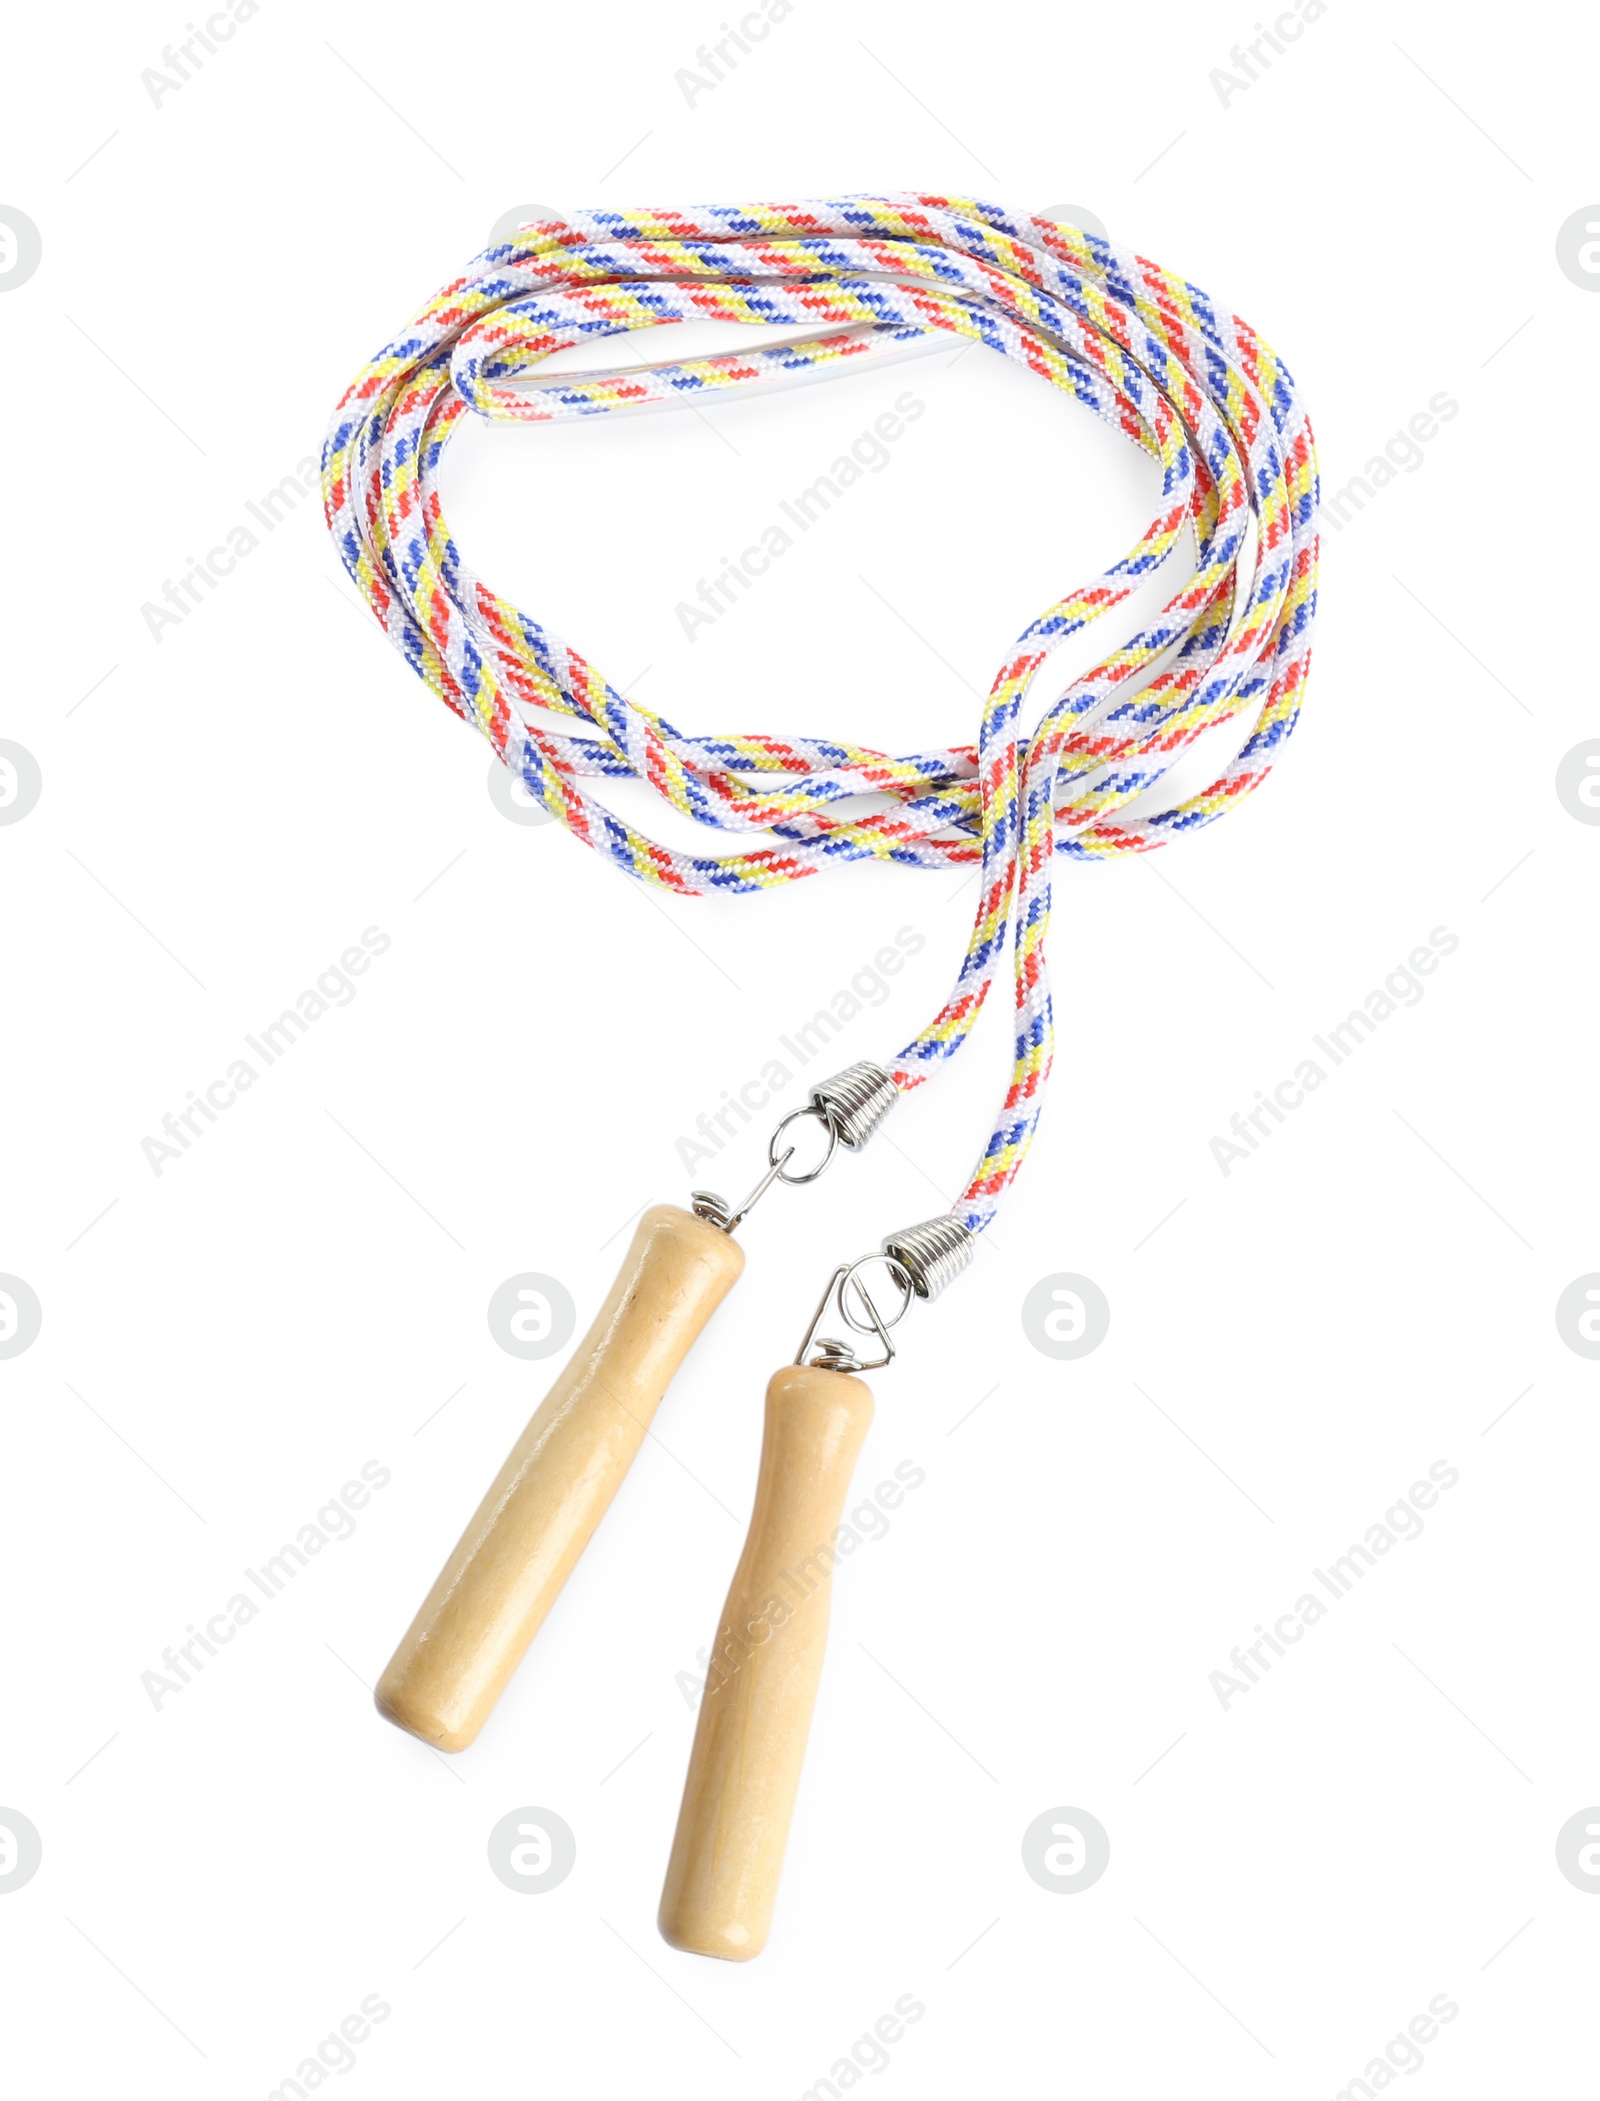 Photo of Colorful skipping rope with wooden handles isolated on white, top view